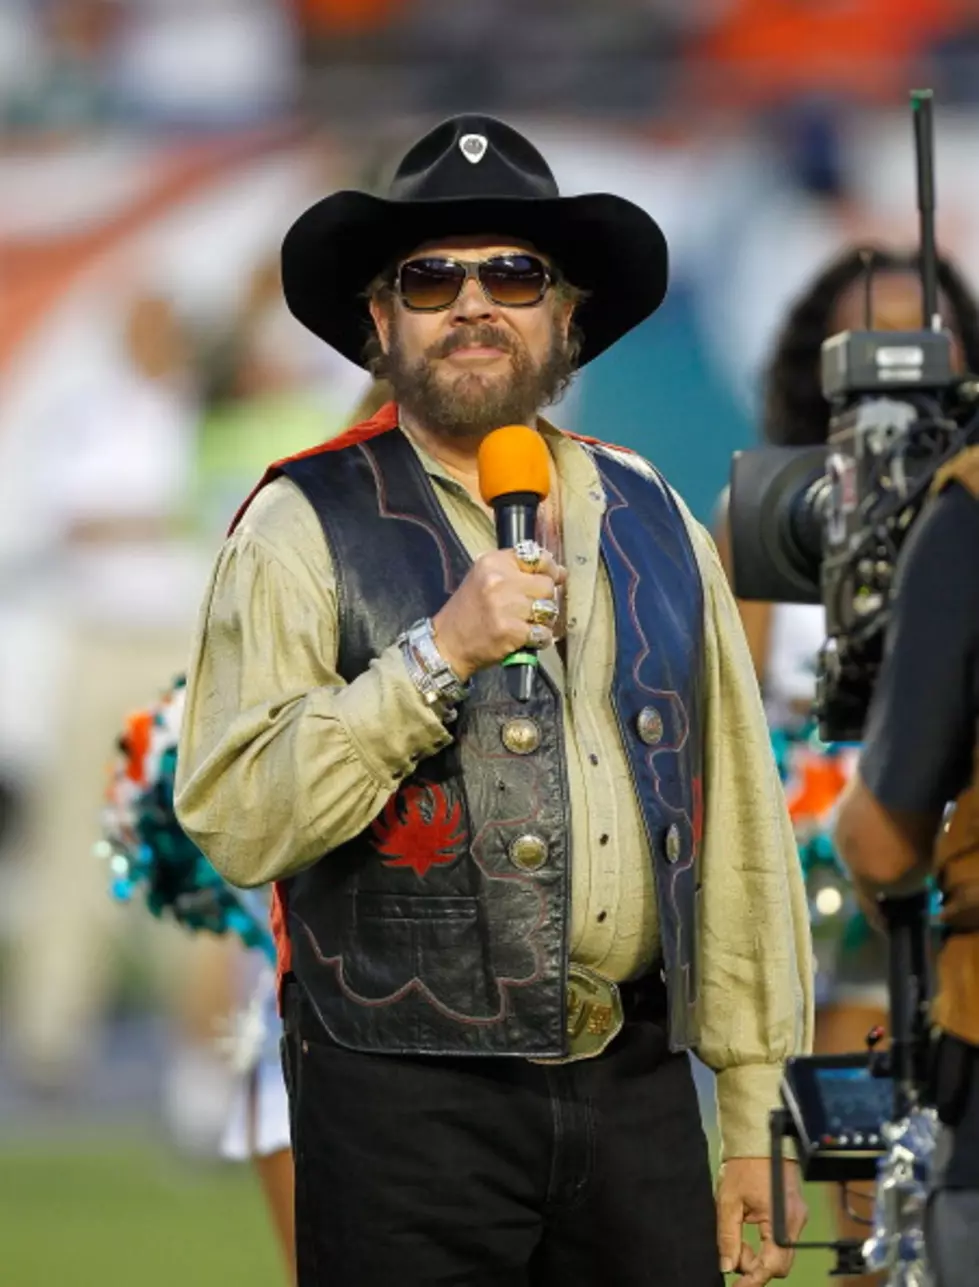 Hank Williams Jr. Booted From ESPN After Remarks About President Obama [VIDEO]